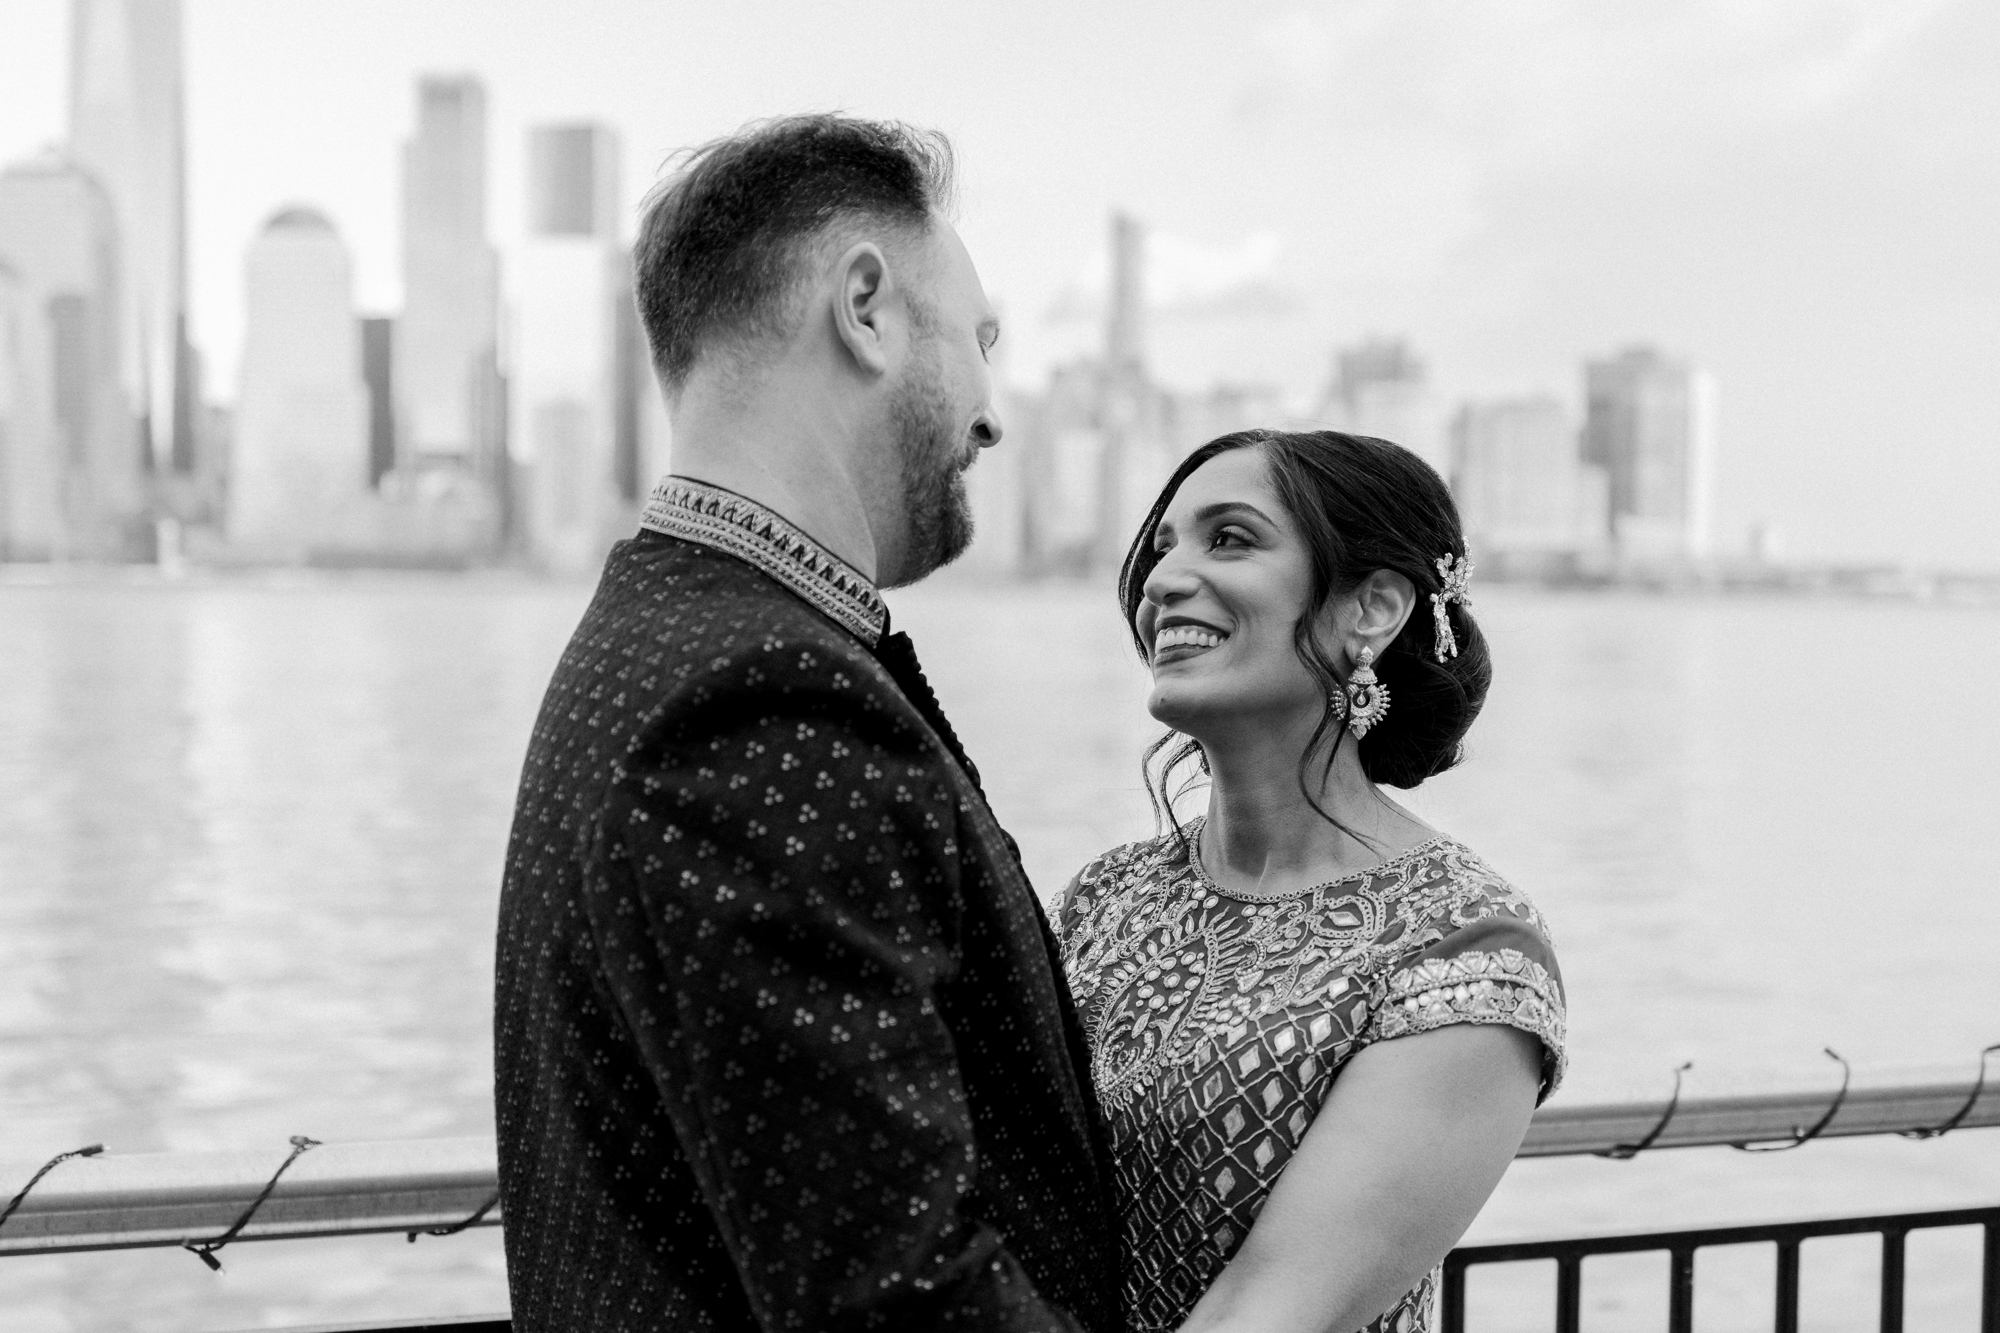 Breathtaking NJ winter wedding indoors at the Rooftop at Exchange Place